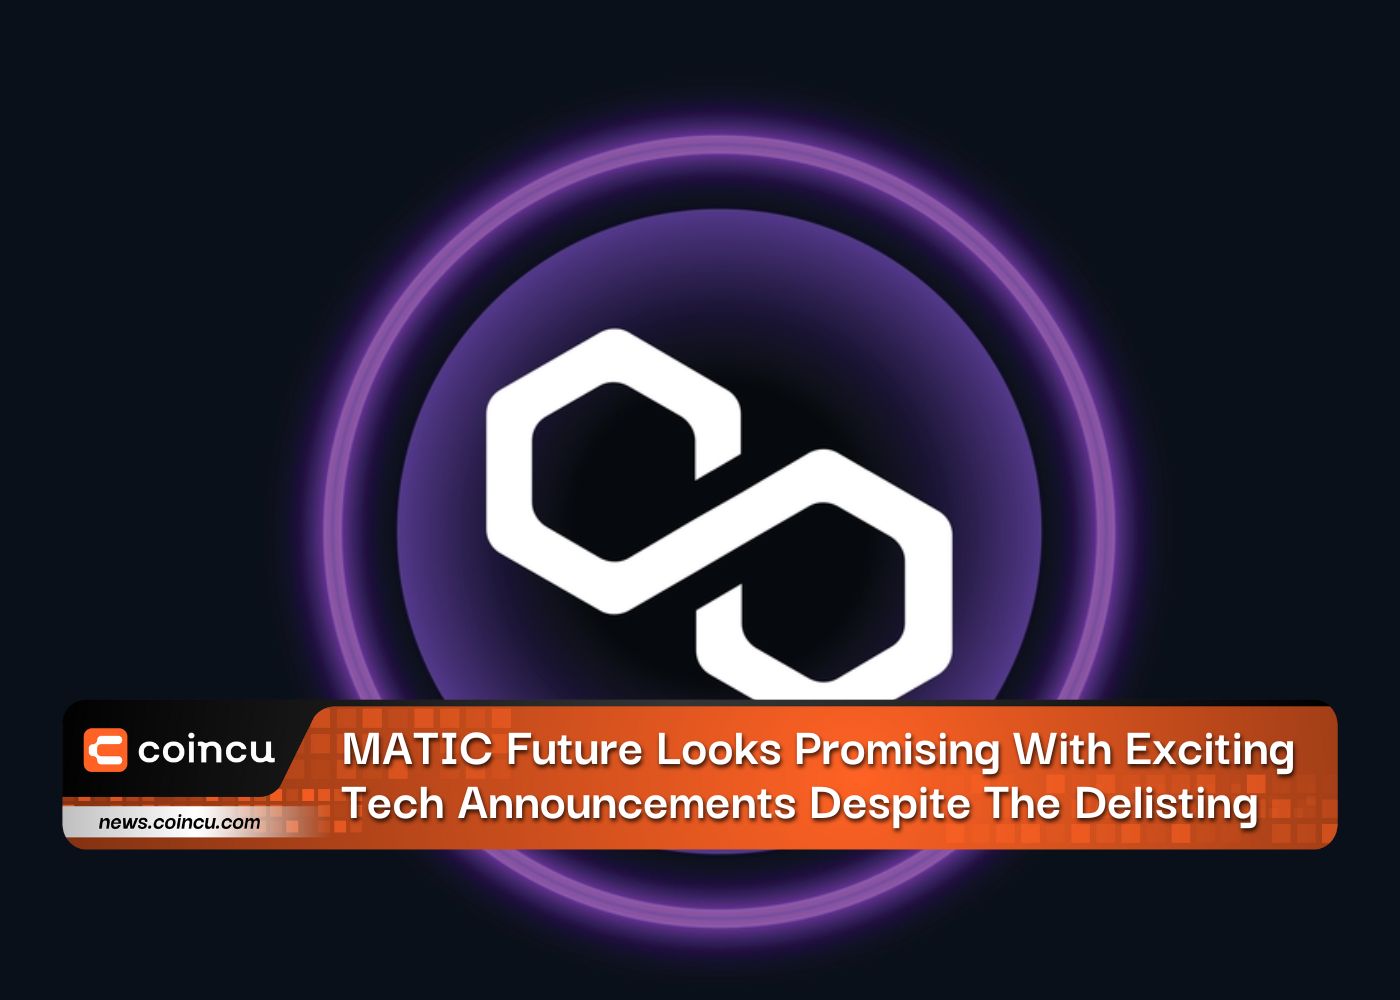 MATIC Future Looks Promising With Exciting Tech Announcements Despite The Delisting